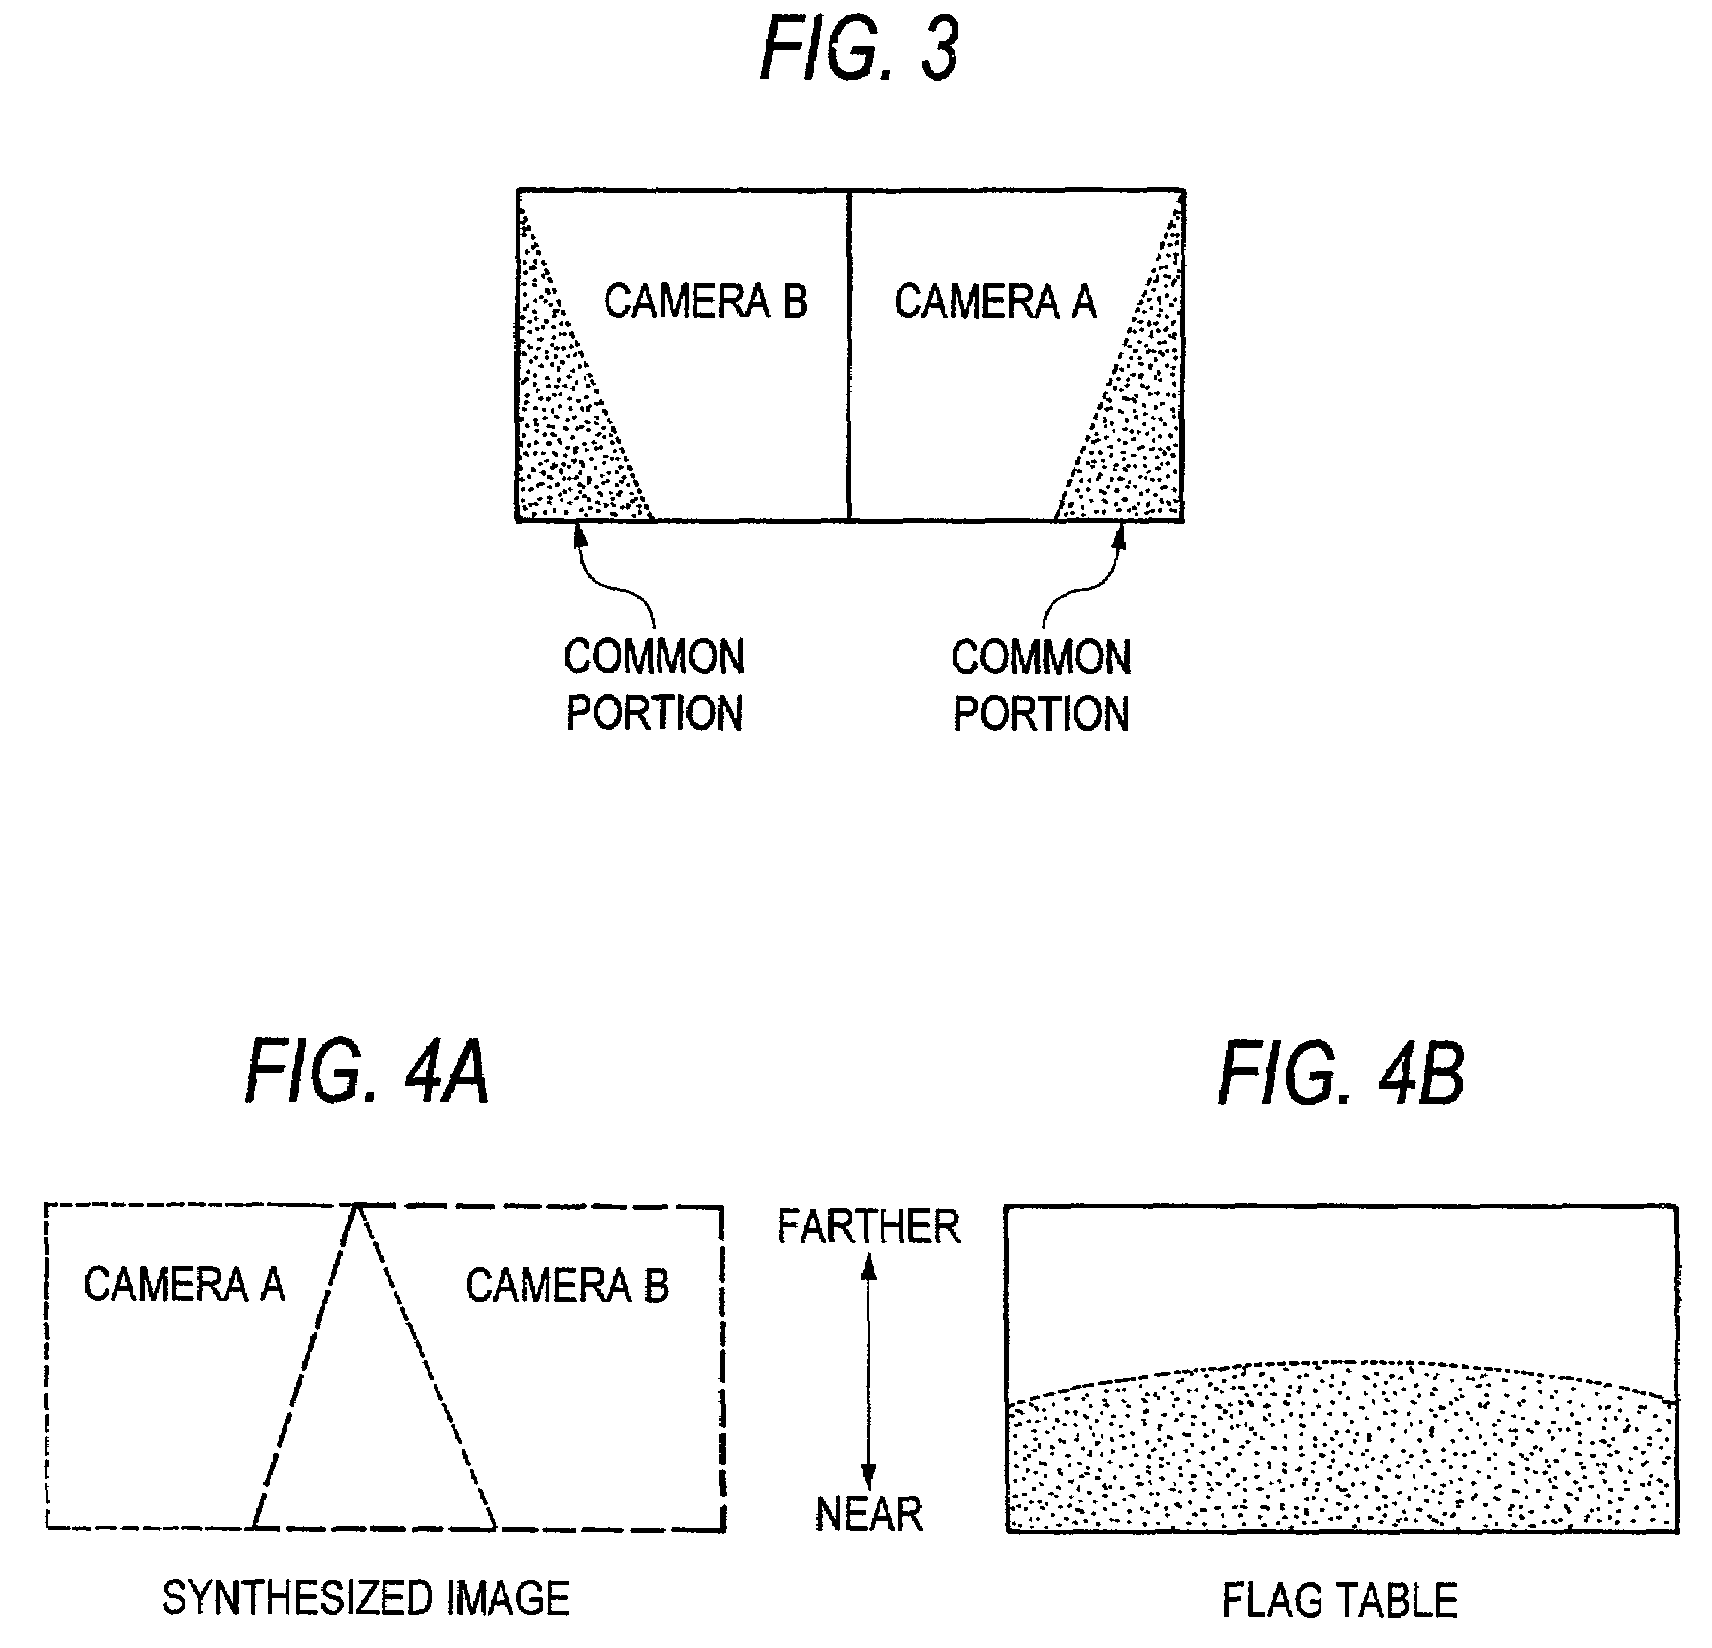 Image synthesis display method and apparatus for vehicle camera